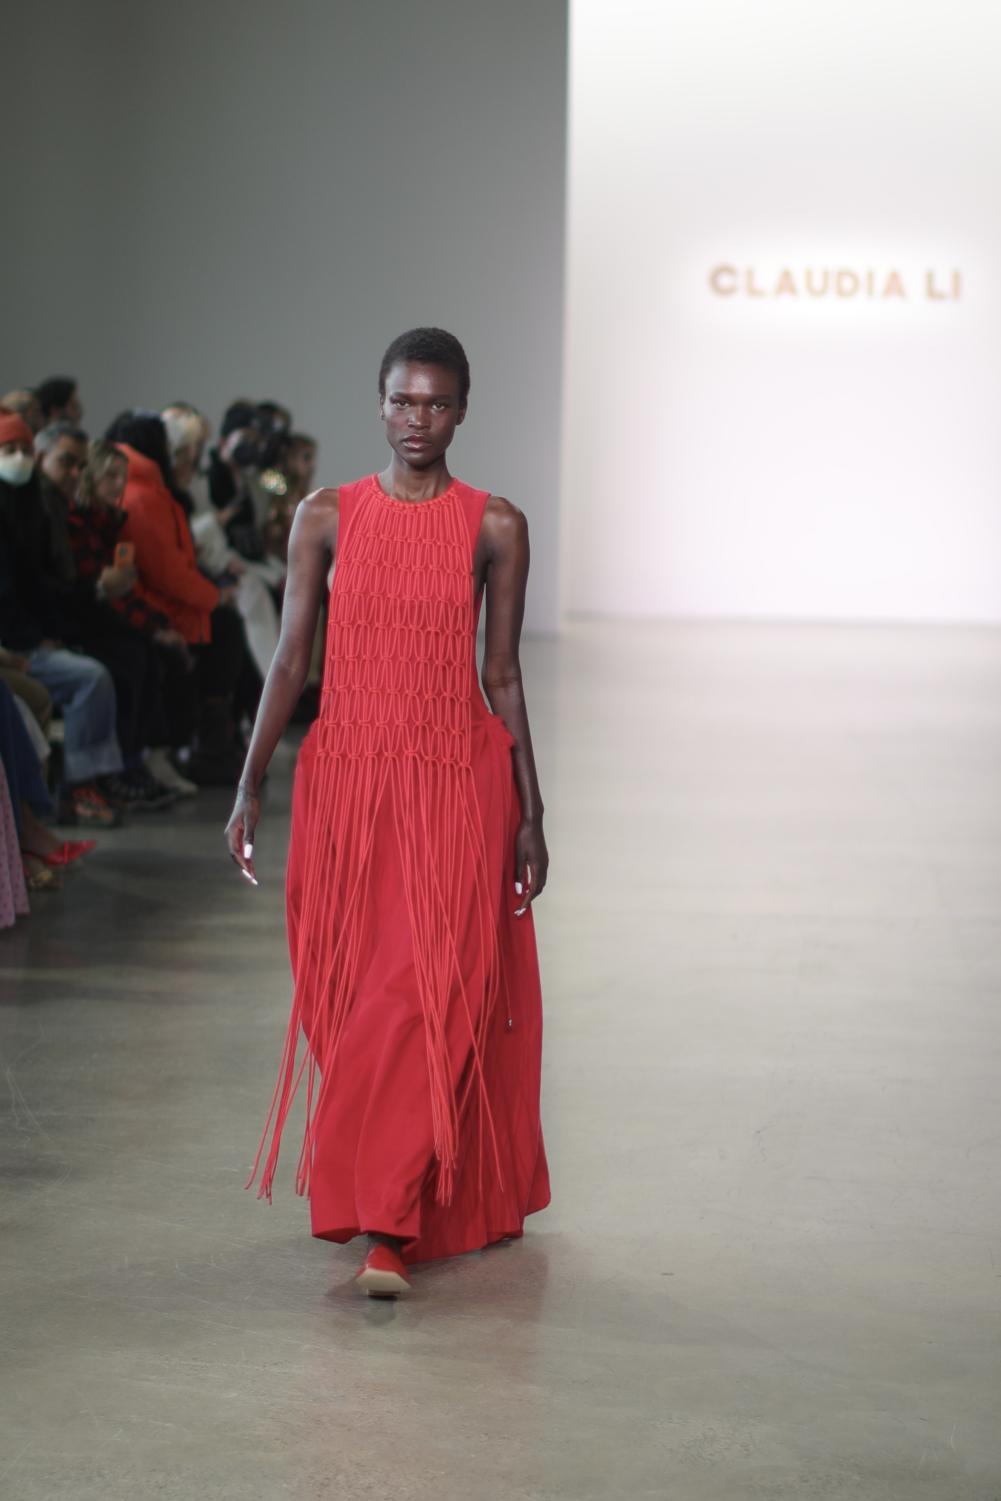 Claudia+Li+brings+another+quirky%2C+playful+collection+to+Fashion+Week